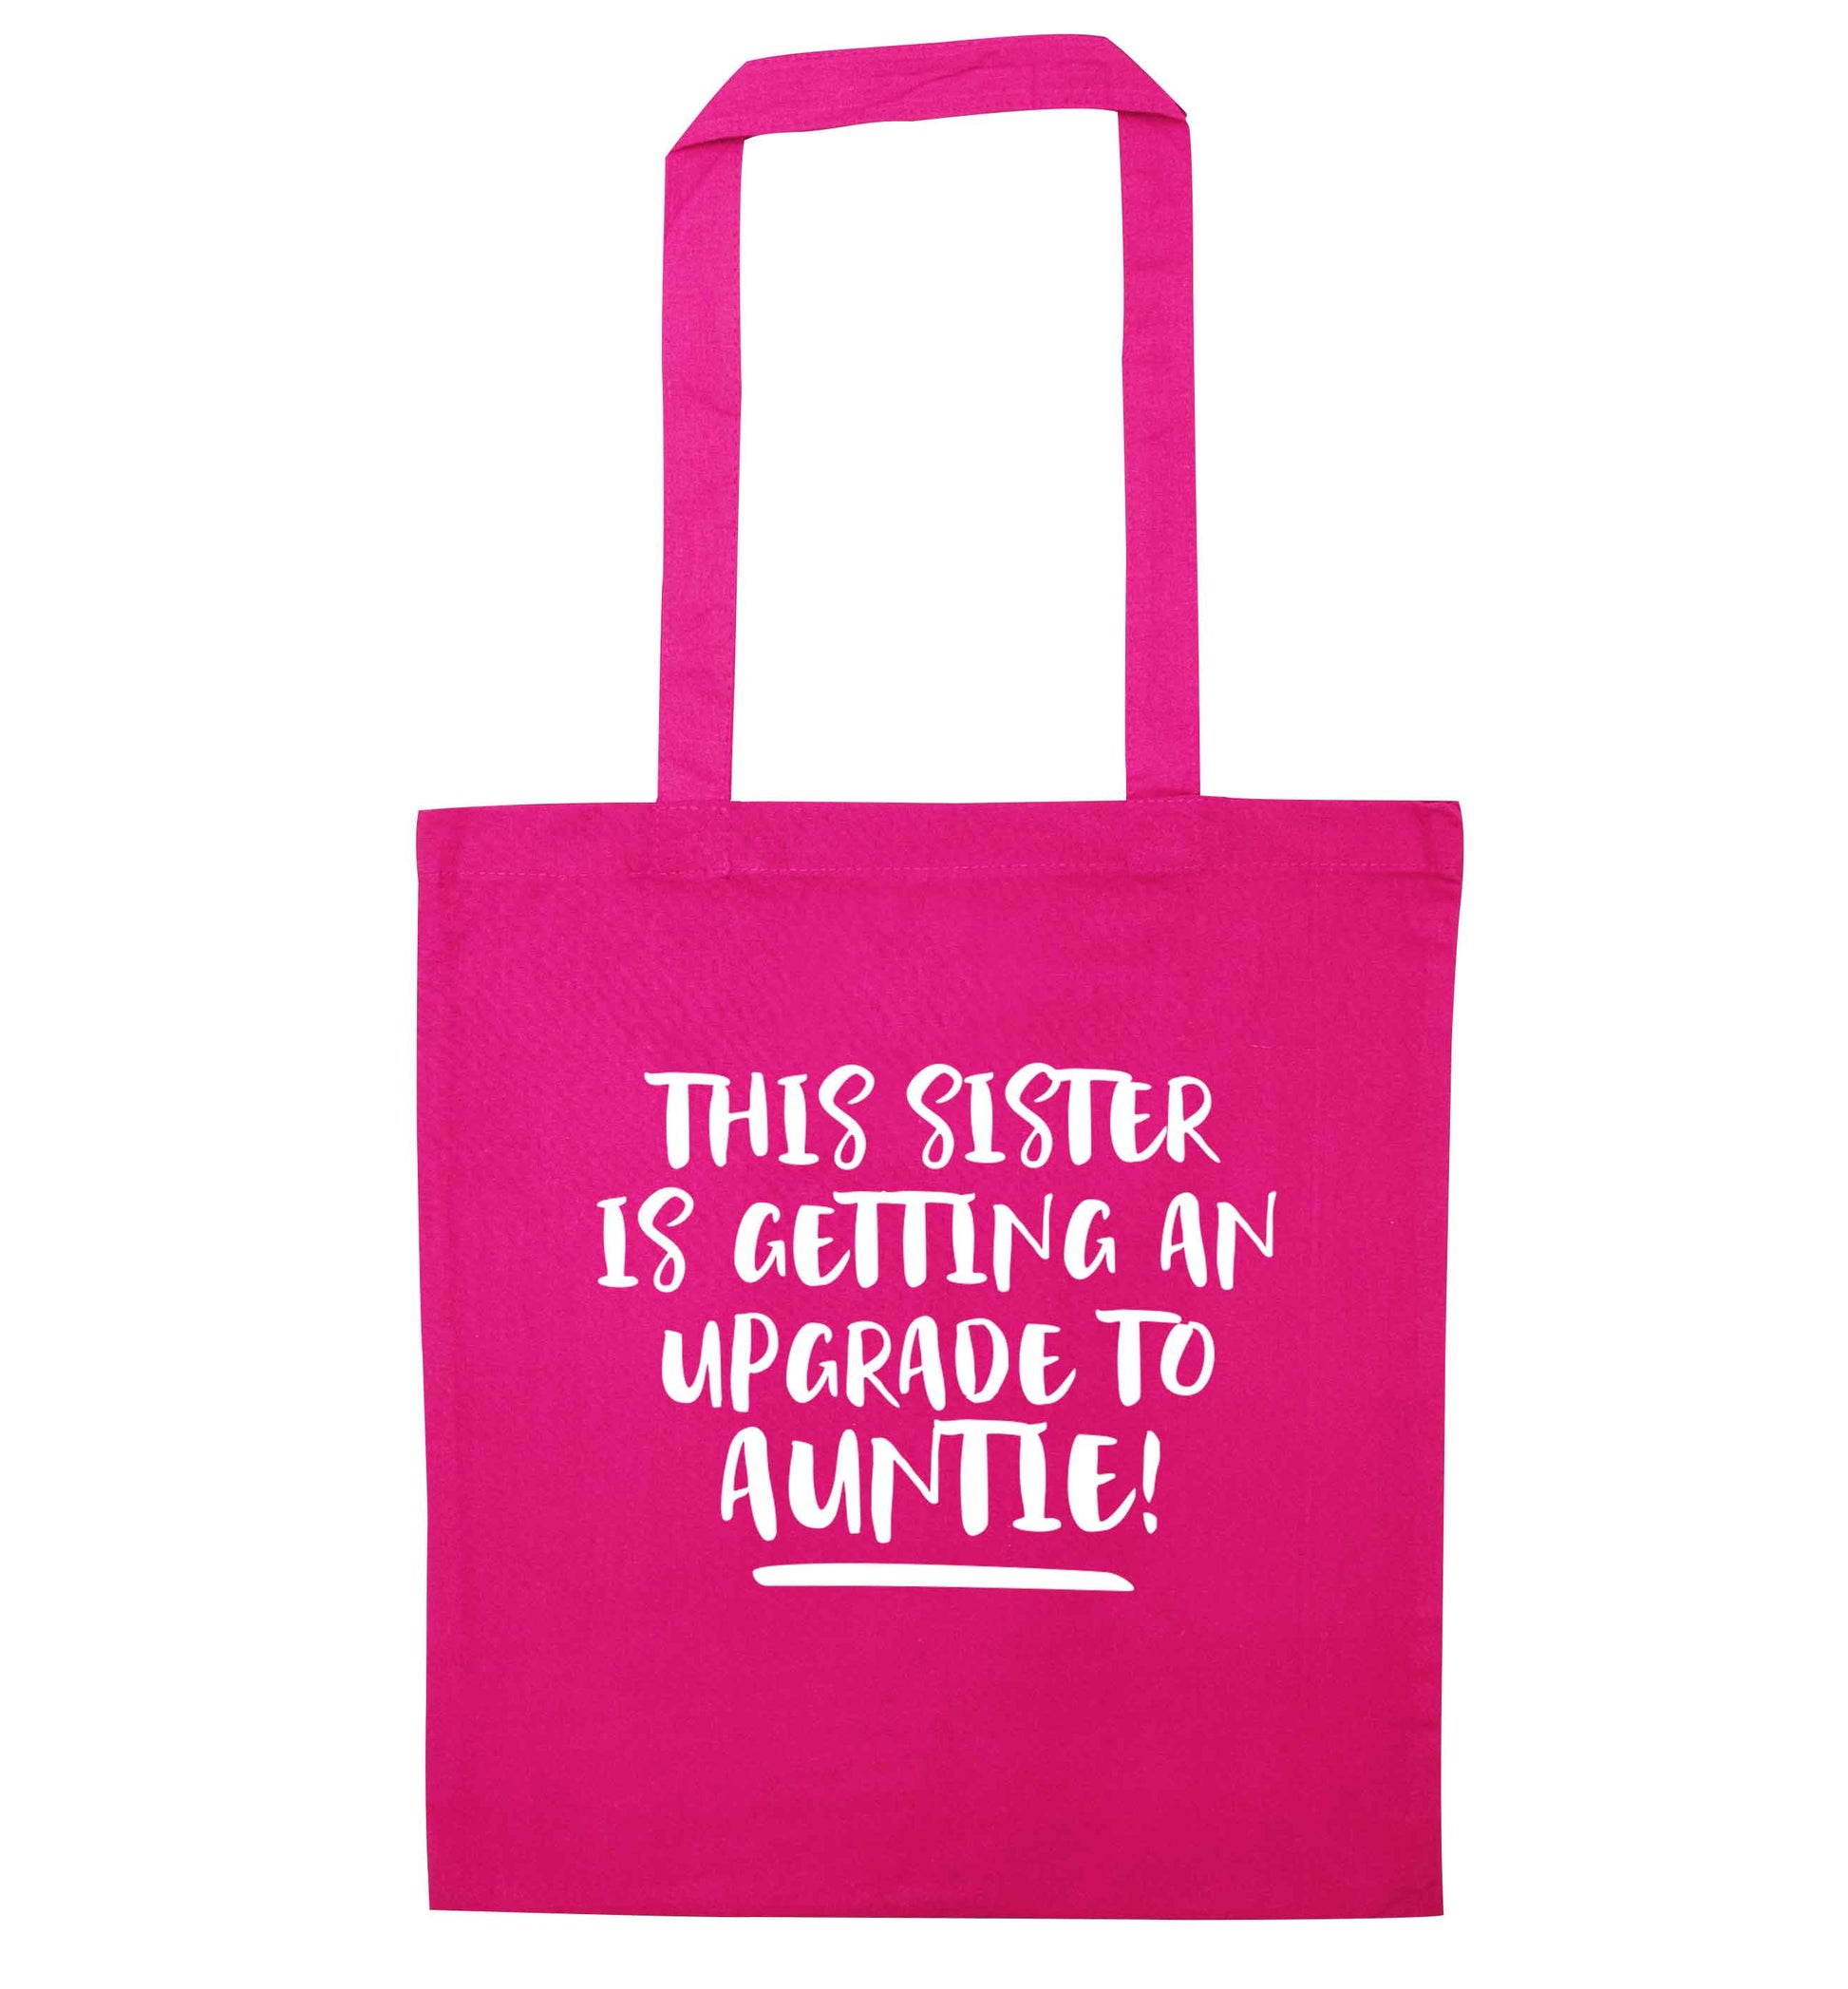 This sister is getting an upgrade to auntie! pink tote bag